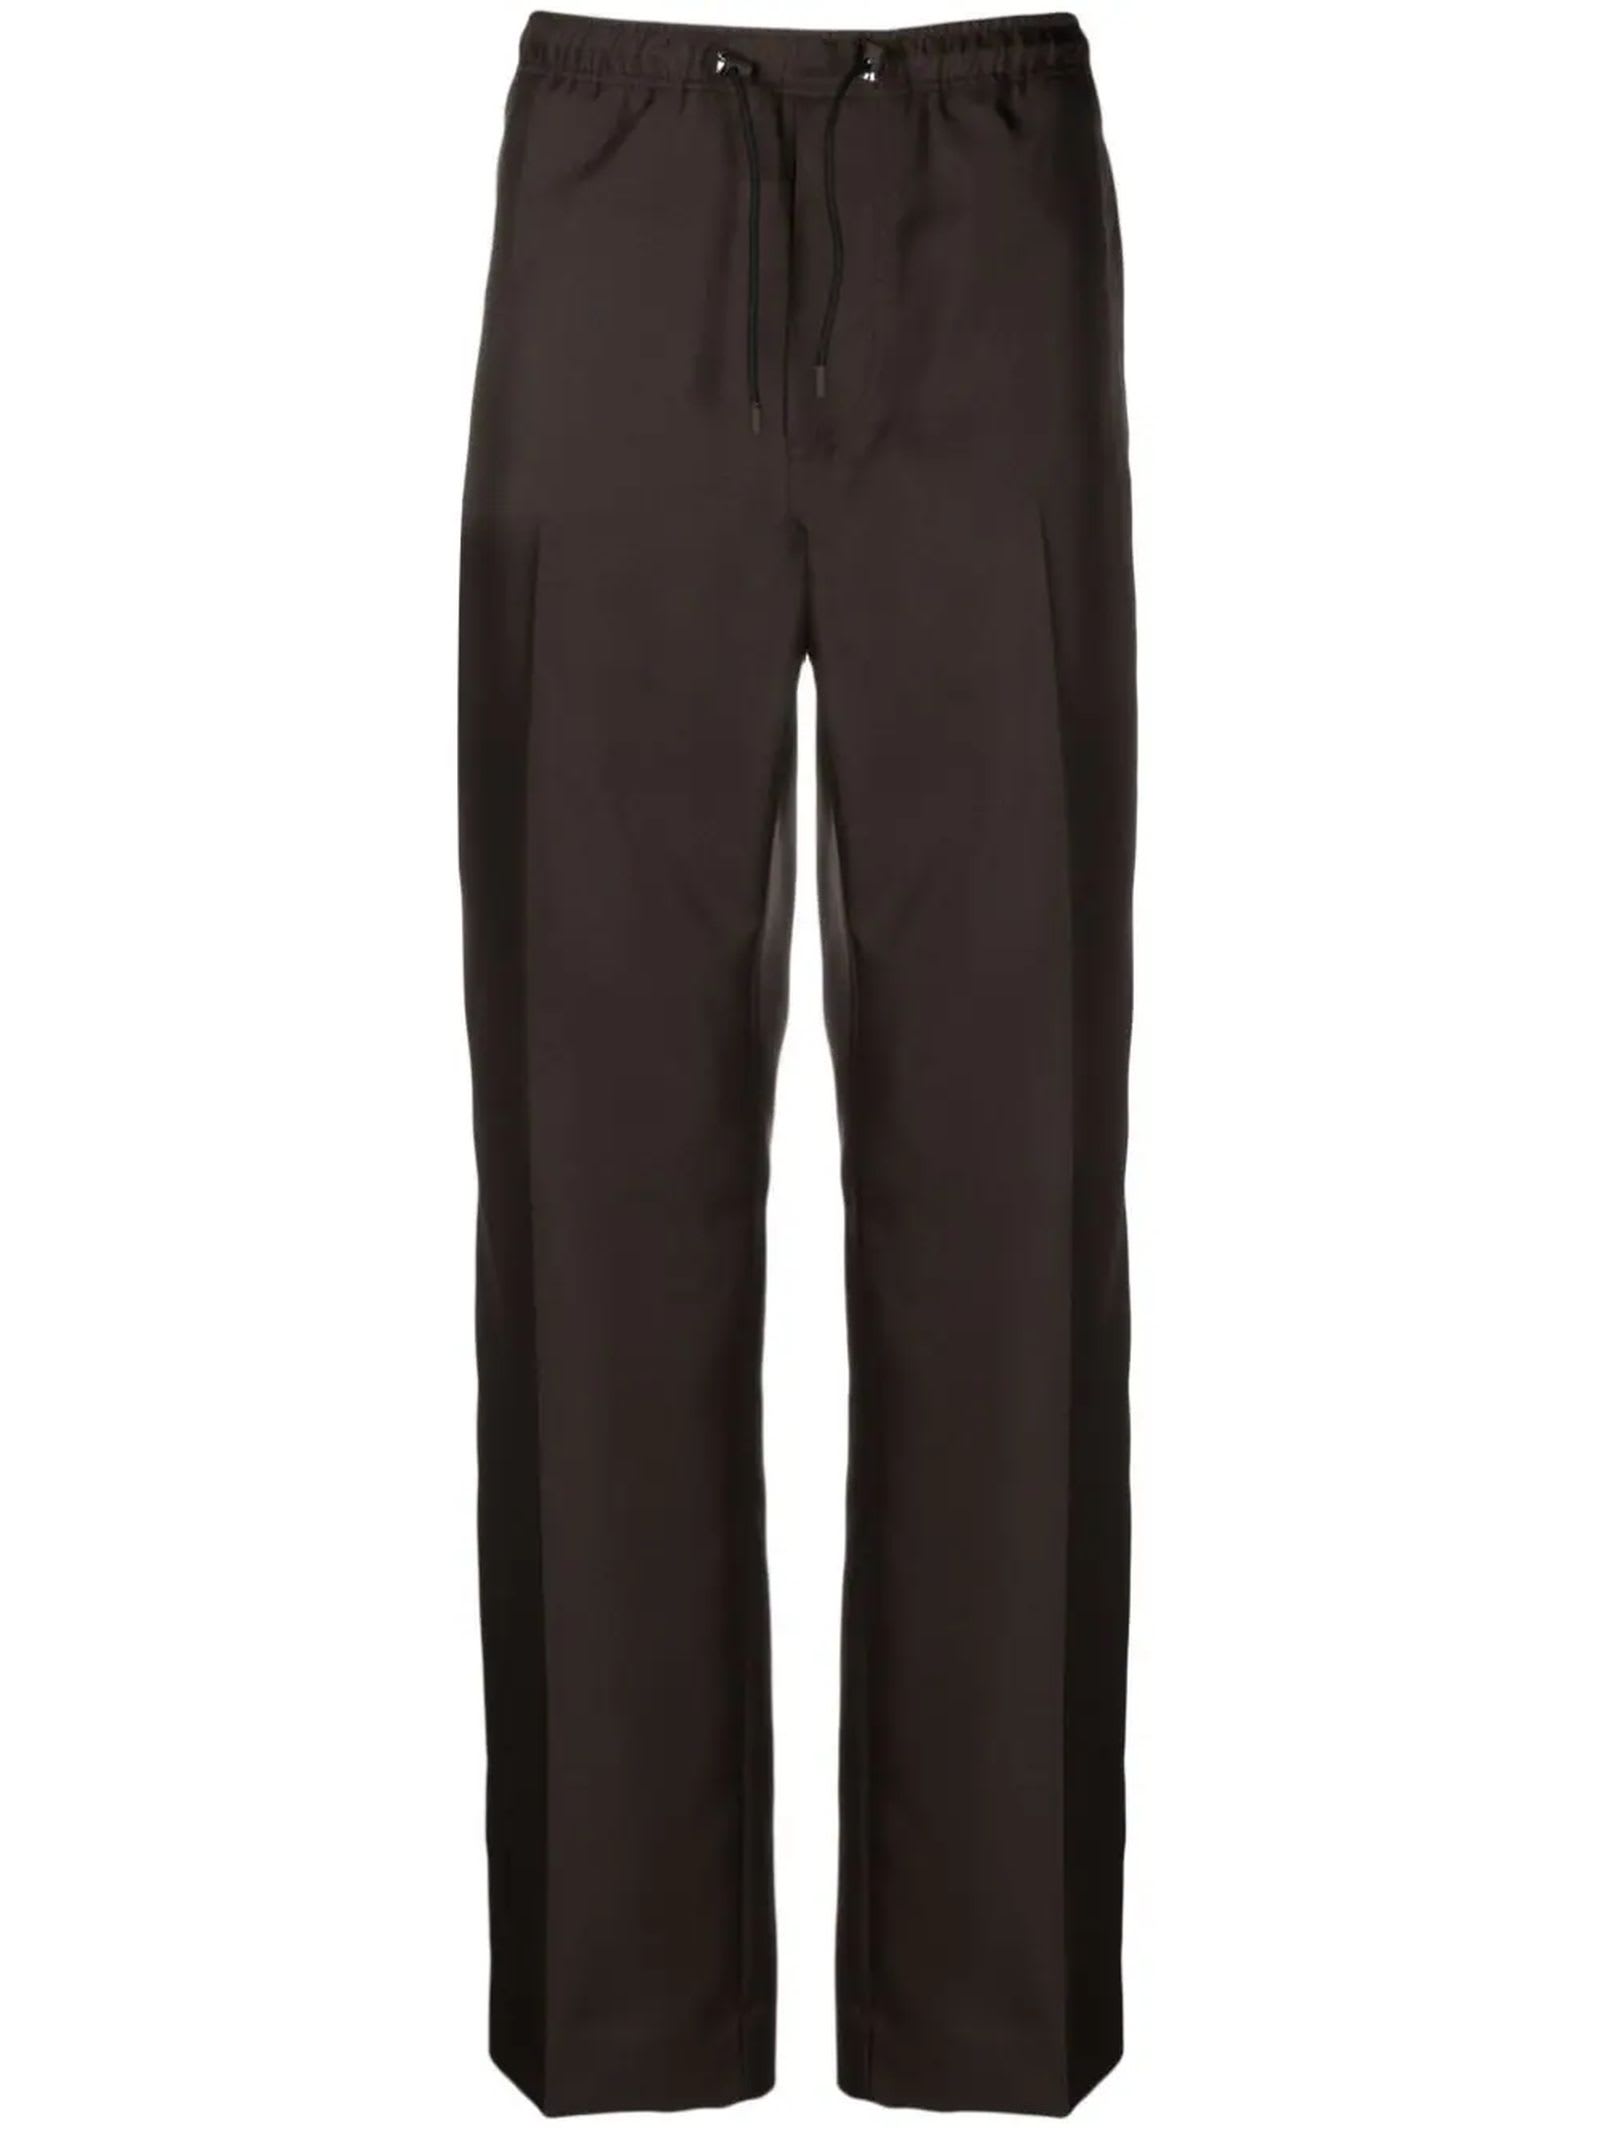 Shop Lanvin Coffee Brown Cotton Blend Trousers In Expresso